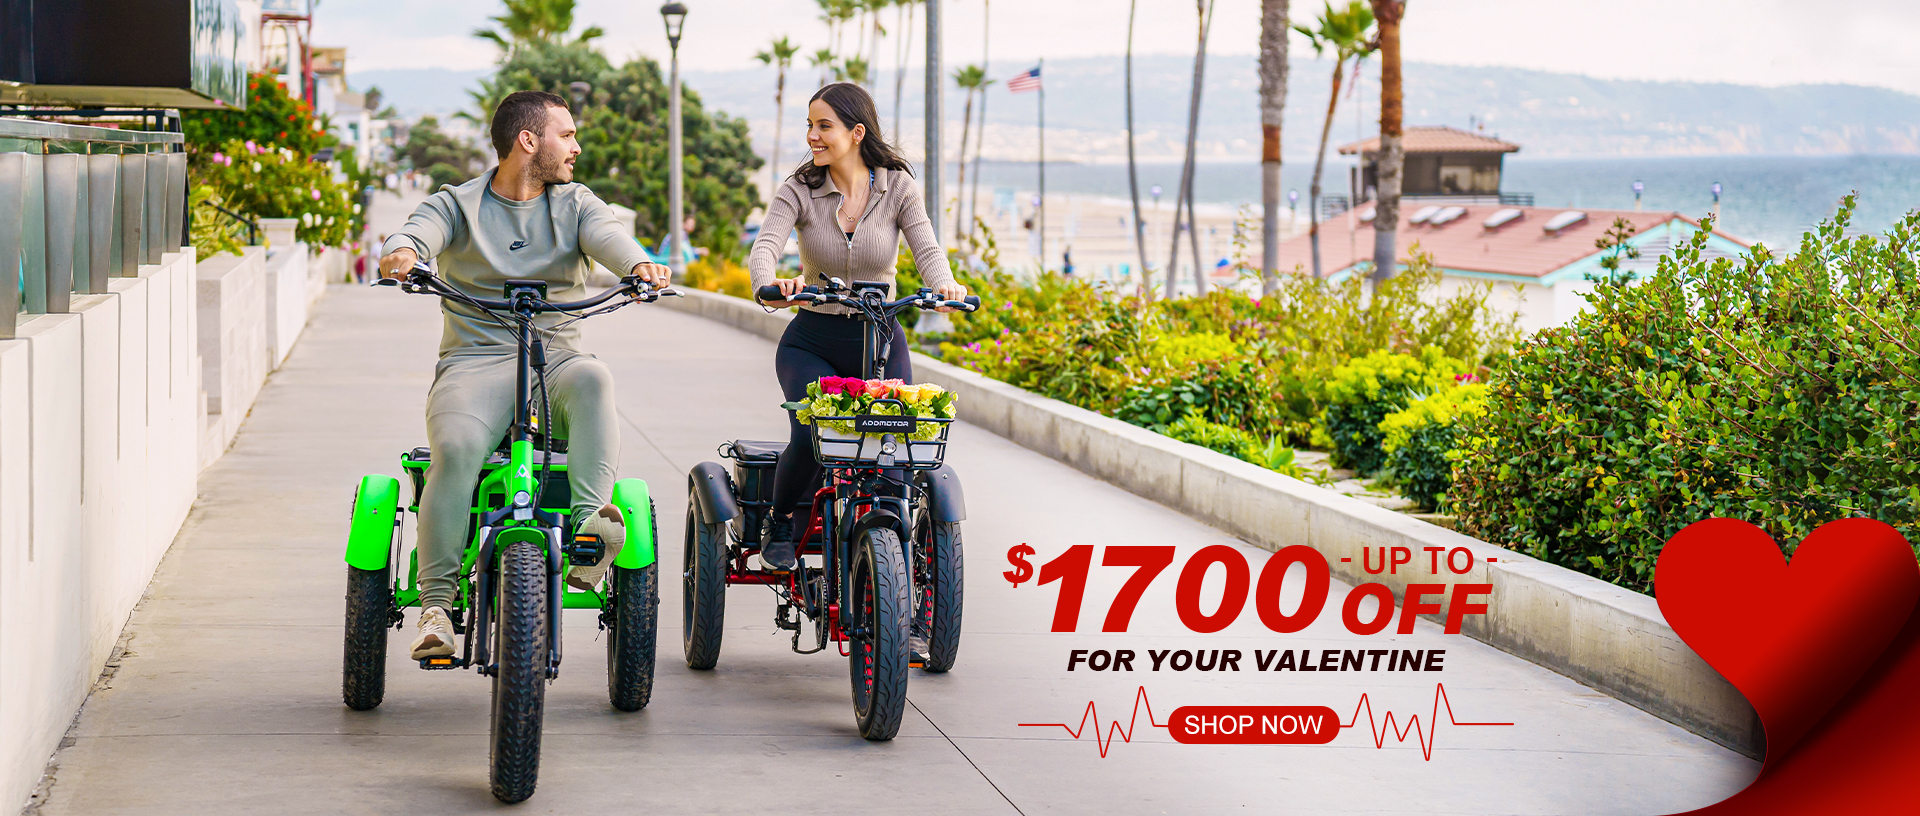 up to $1700 OFF for your valentine's gift